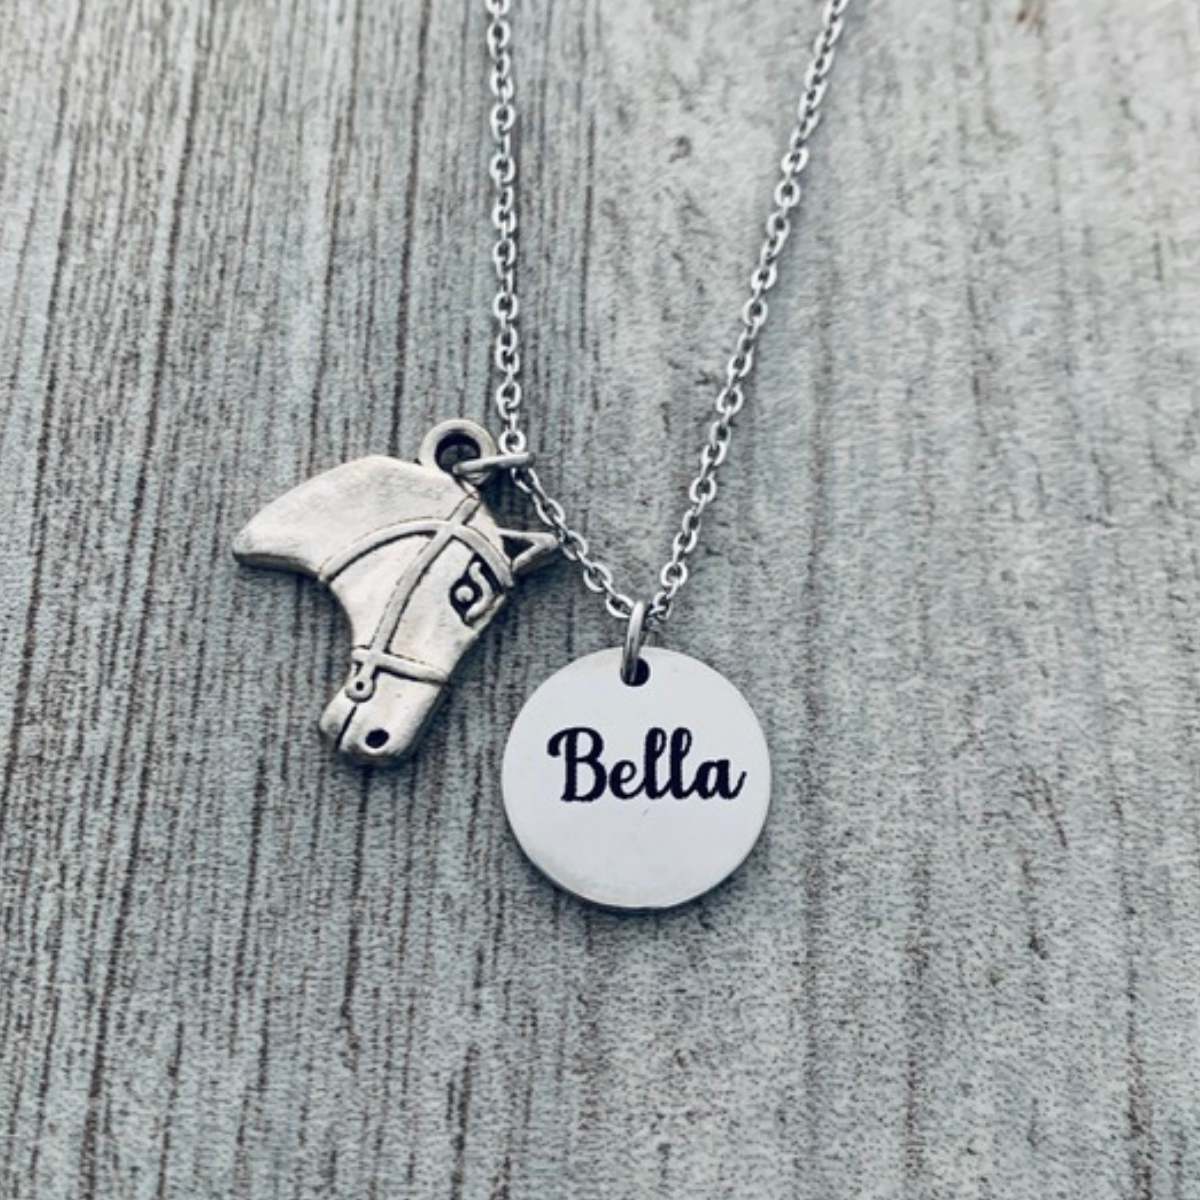 Personalized Engraved Horse Necklace